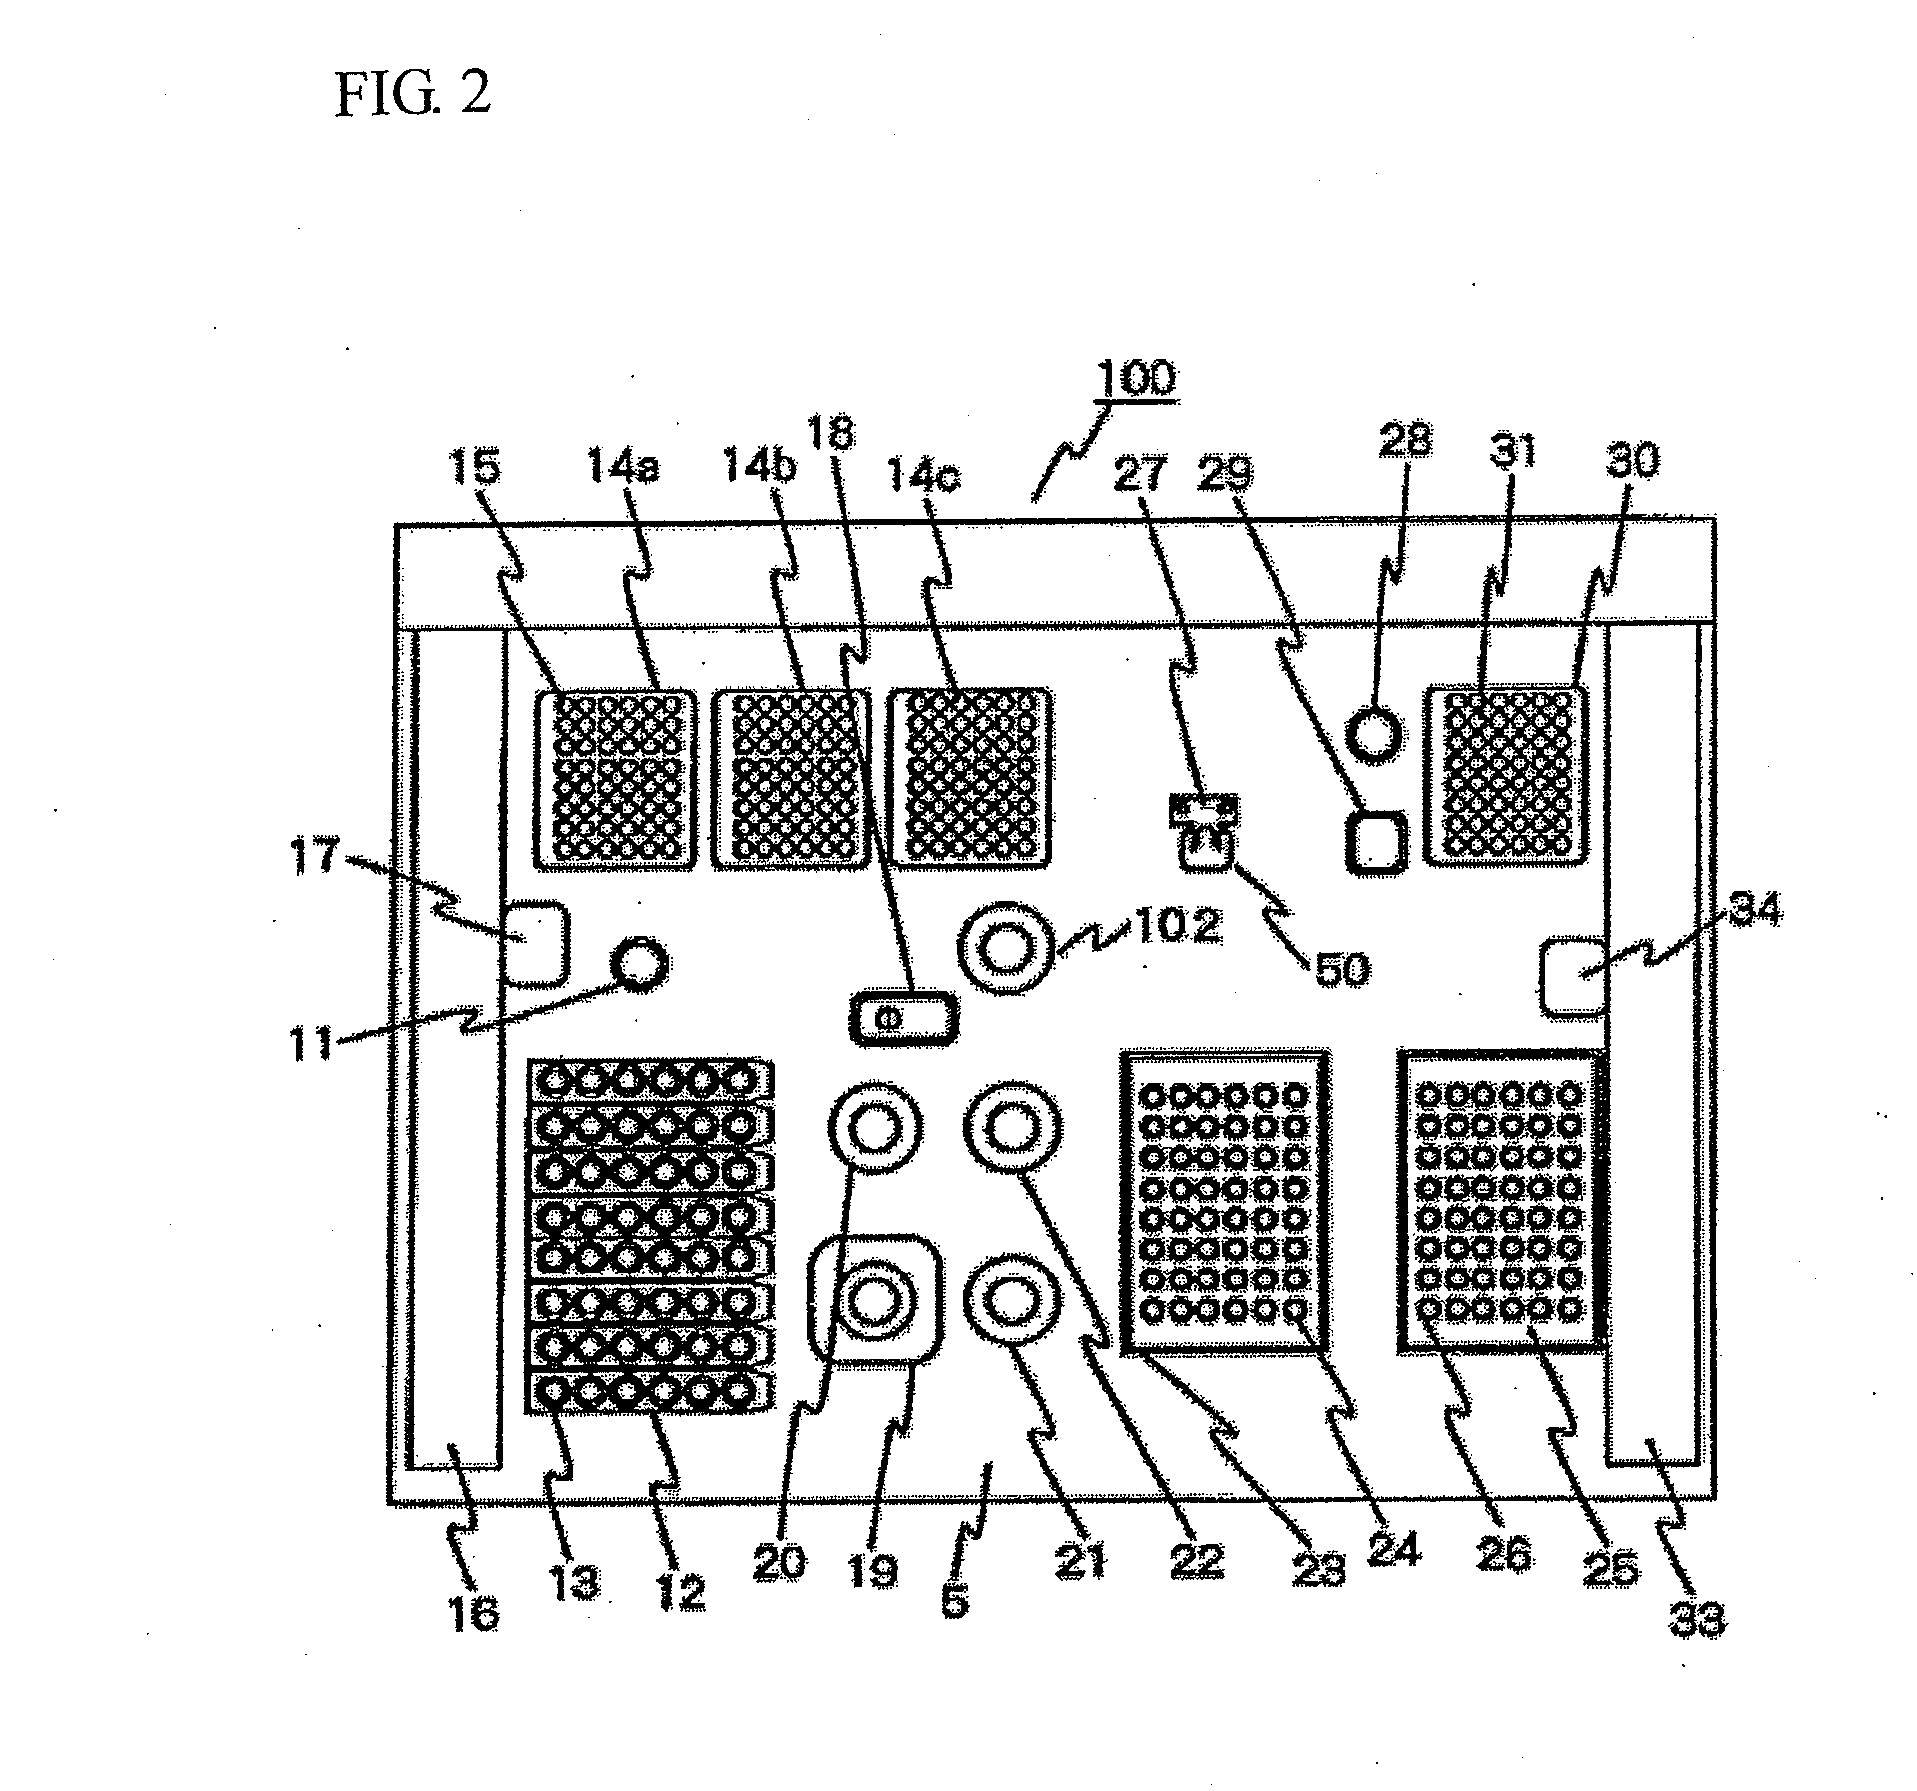 Instrument and method for collecting nucleic acids